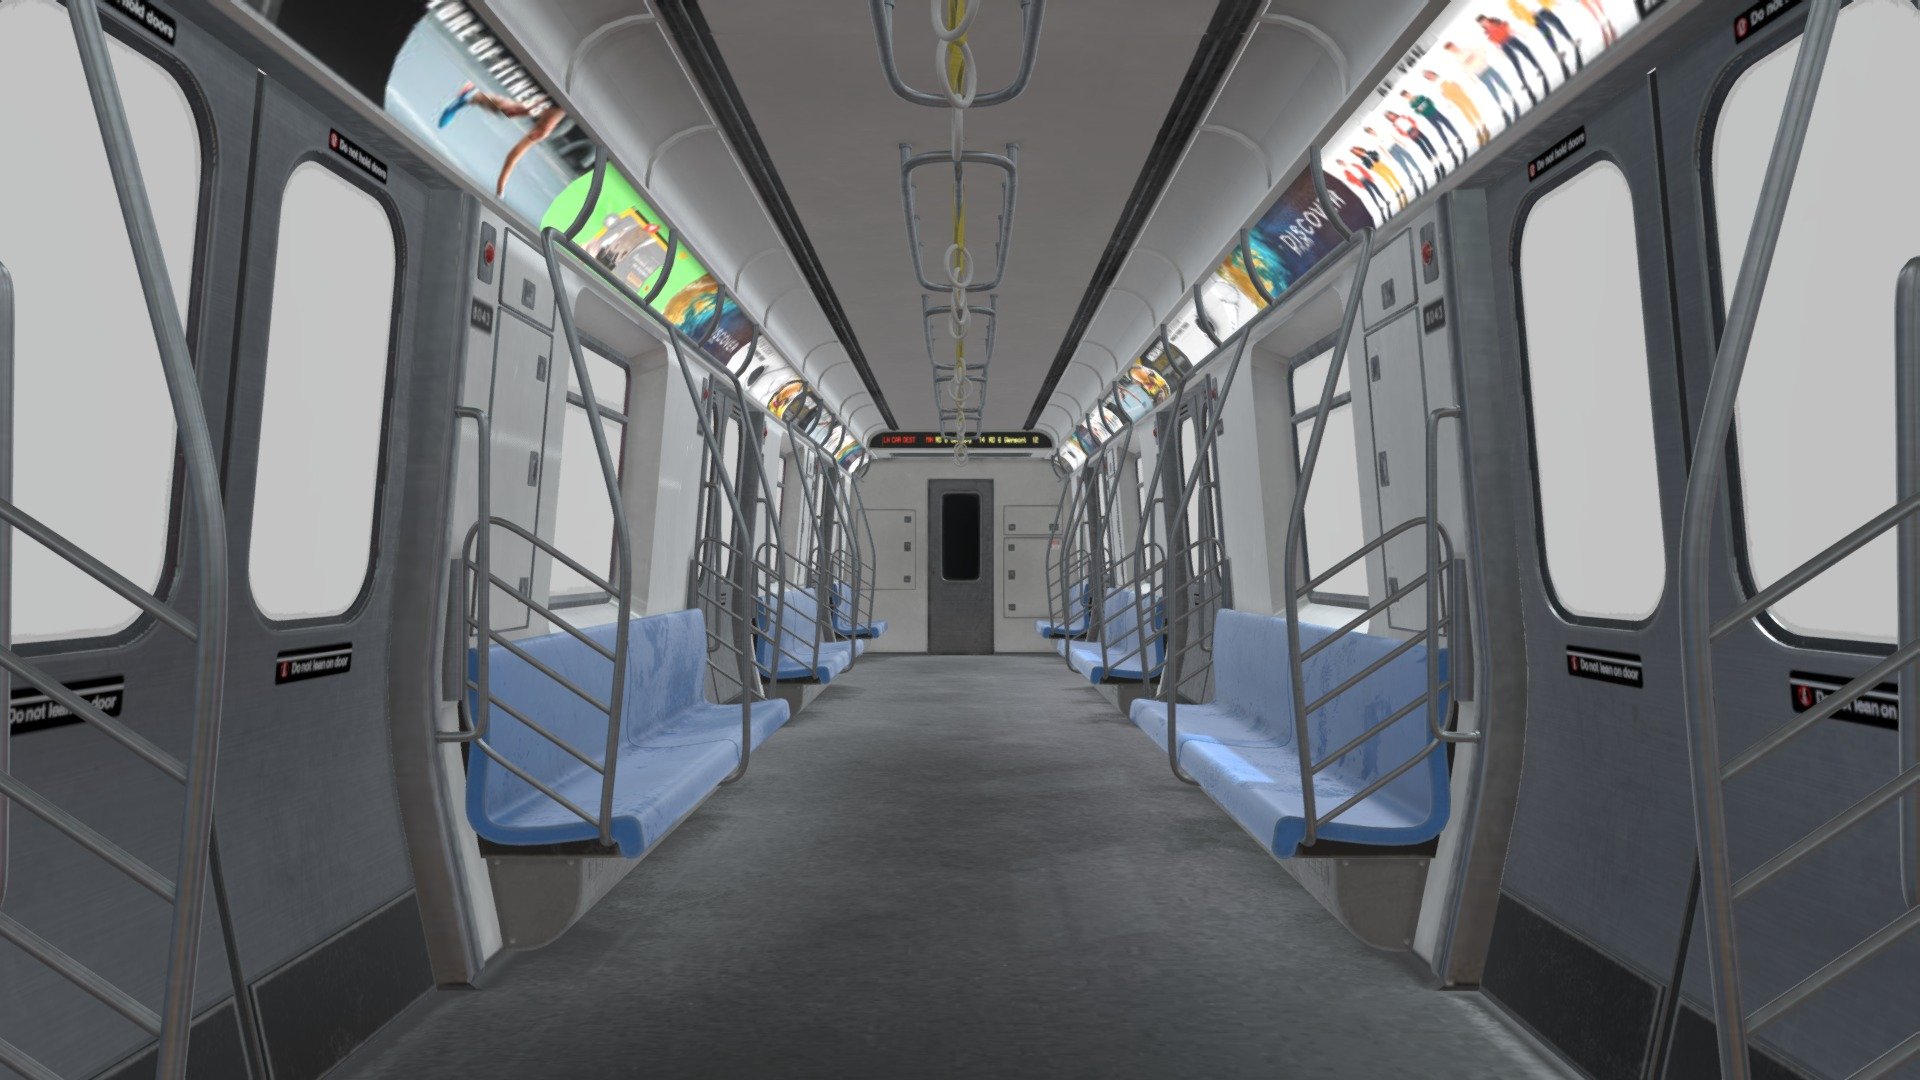 This subway car interior is inspired by a New York R160 class of subway car. THIS IS ONLY THE INTERIOR. NO EXTERIOR. The model is viewable from all angles inside the car. This model is great as an All in 1 subway interior and can be easily modified by removing the chairs and railings.

This Includes:

The mesh (Subway Car Base, Chairs, Doors, Railings)
-8K, 4K and 2K Texture Sets (Albedo, Metallic, Roughness, Normal, Emissive, Opacity)

The meshes are all UV Unwrapped with vertex colors for easy retexturing 3d model